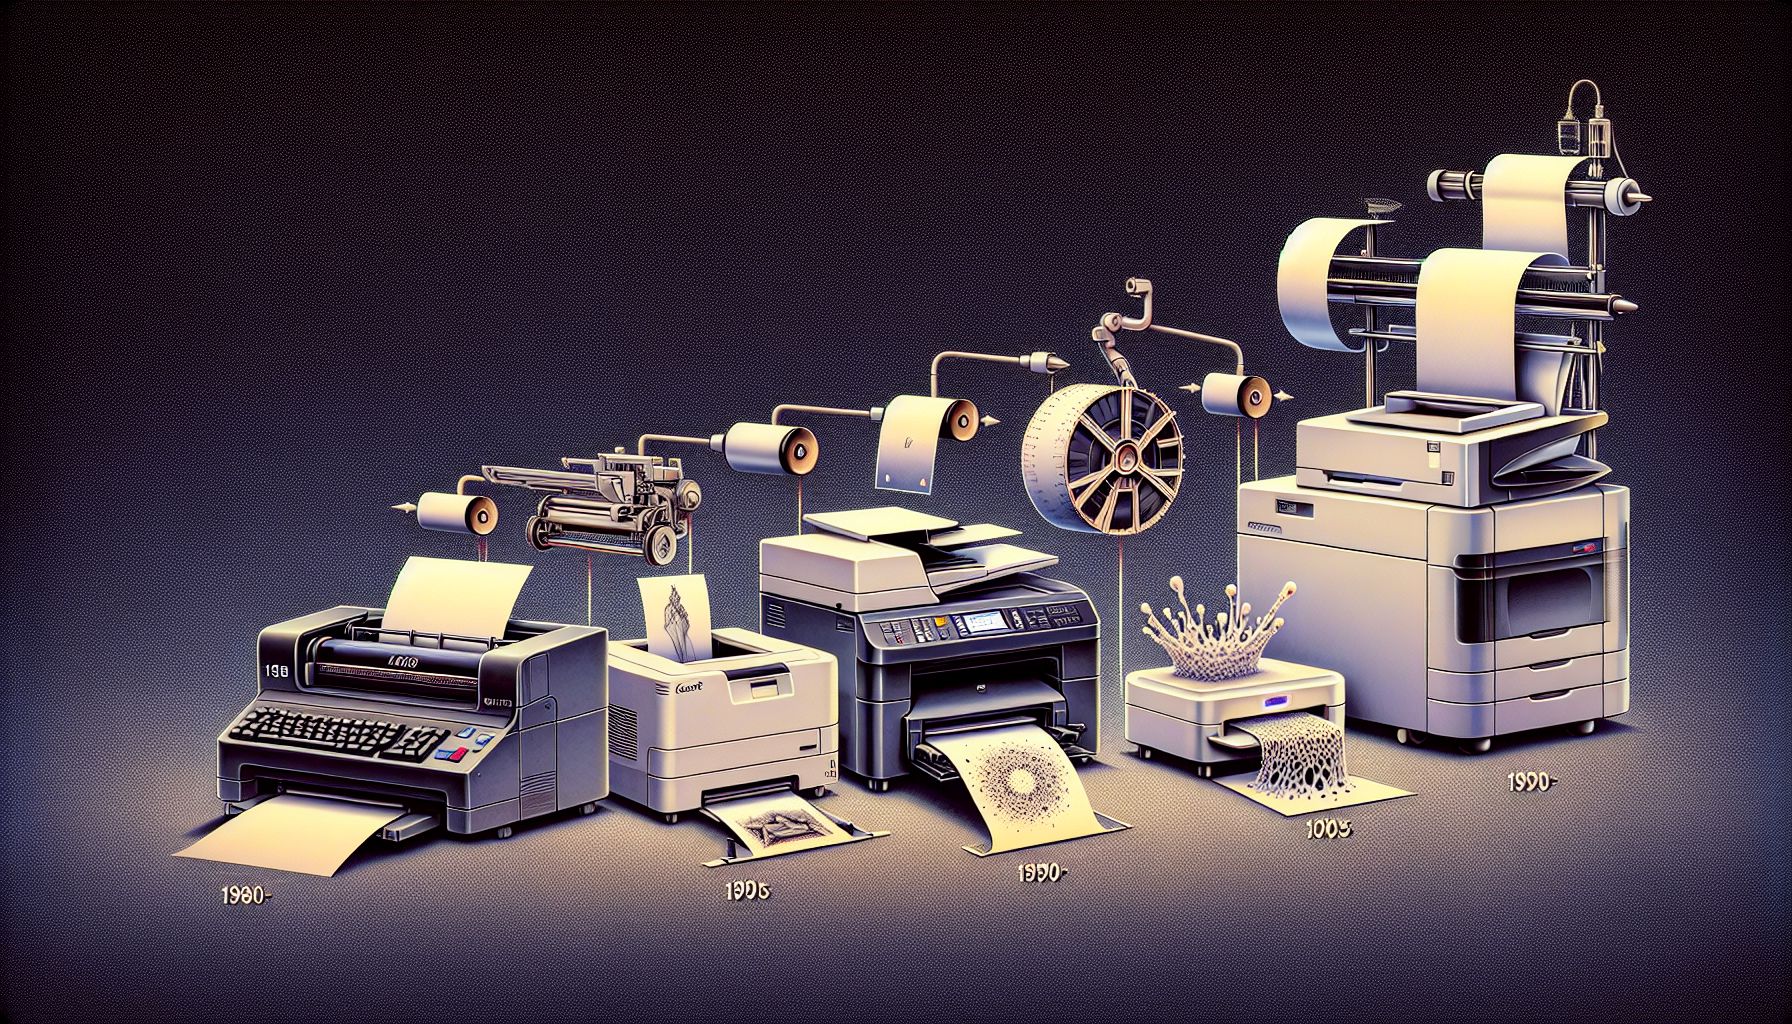 The Evolution of Printers: From Dot Matrix to 3D